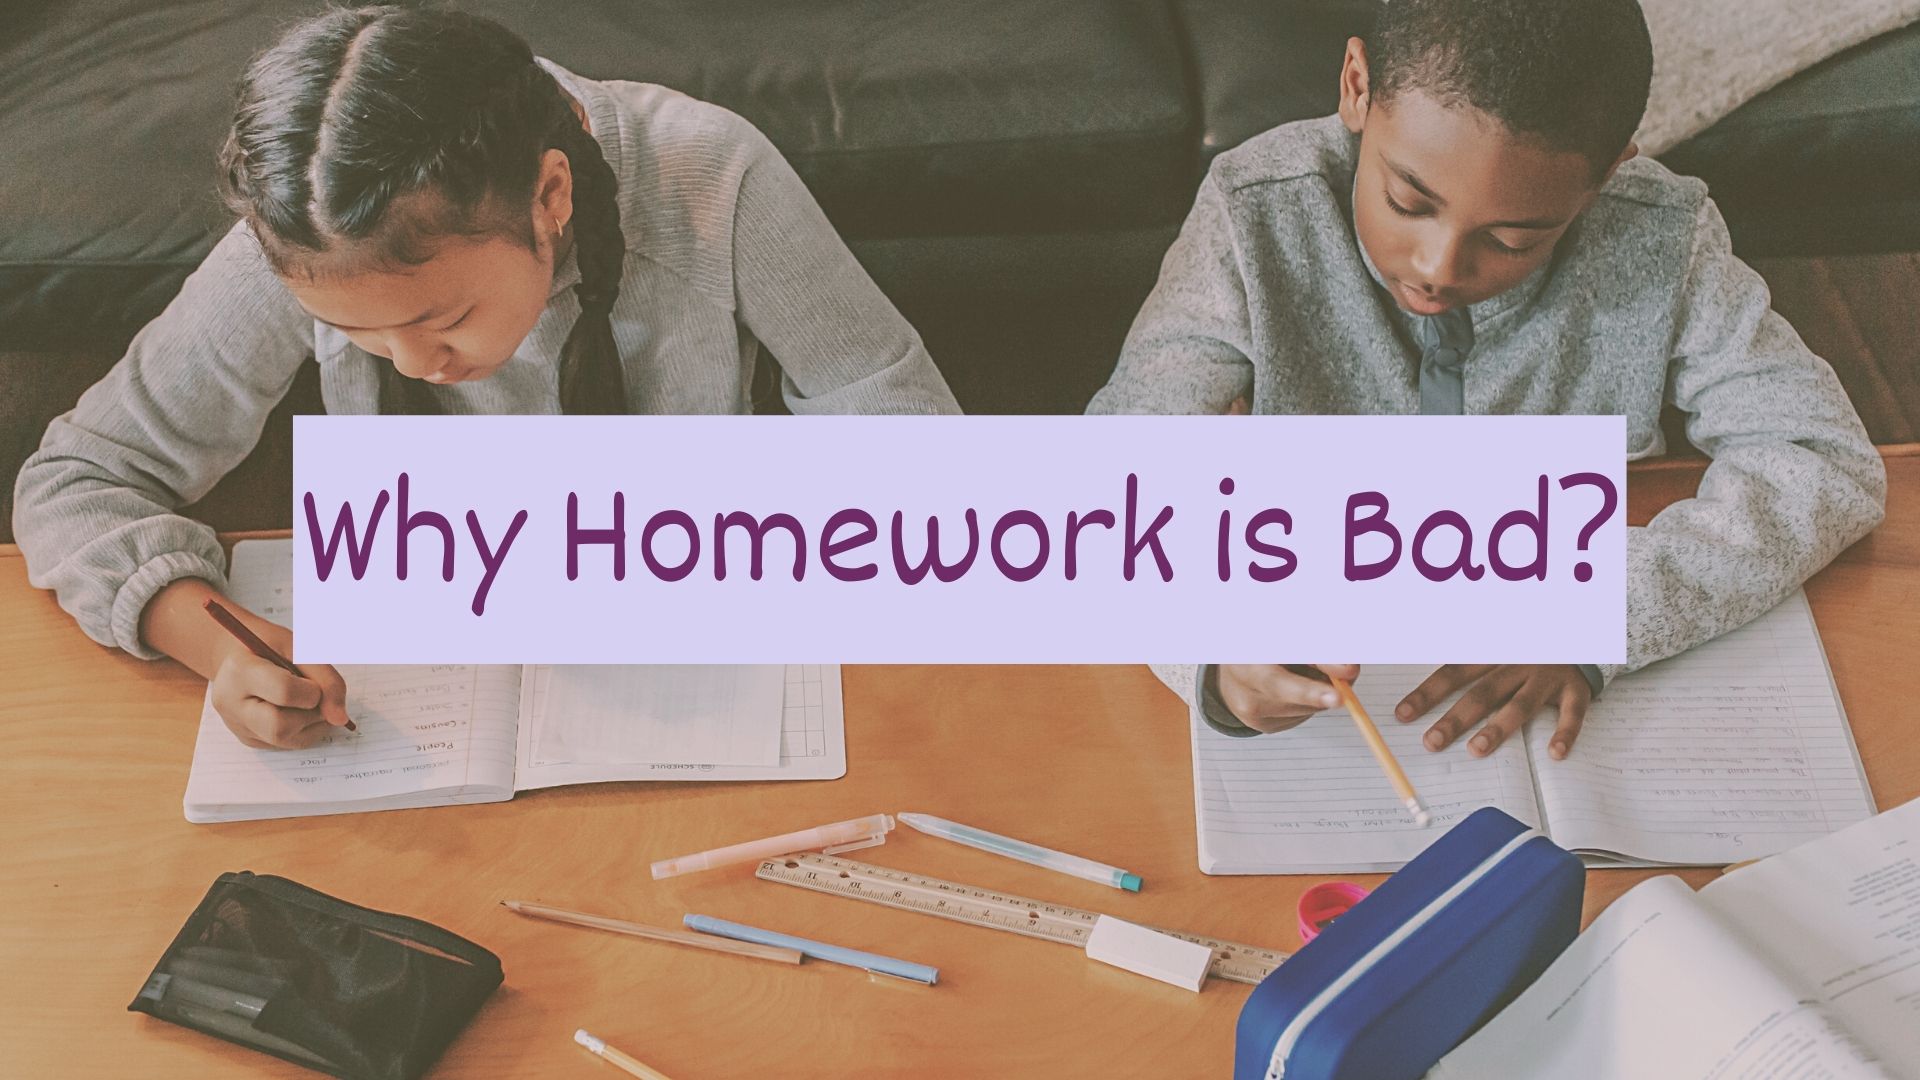 what are 3 reasons why homework is bad